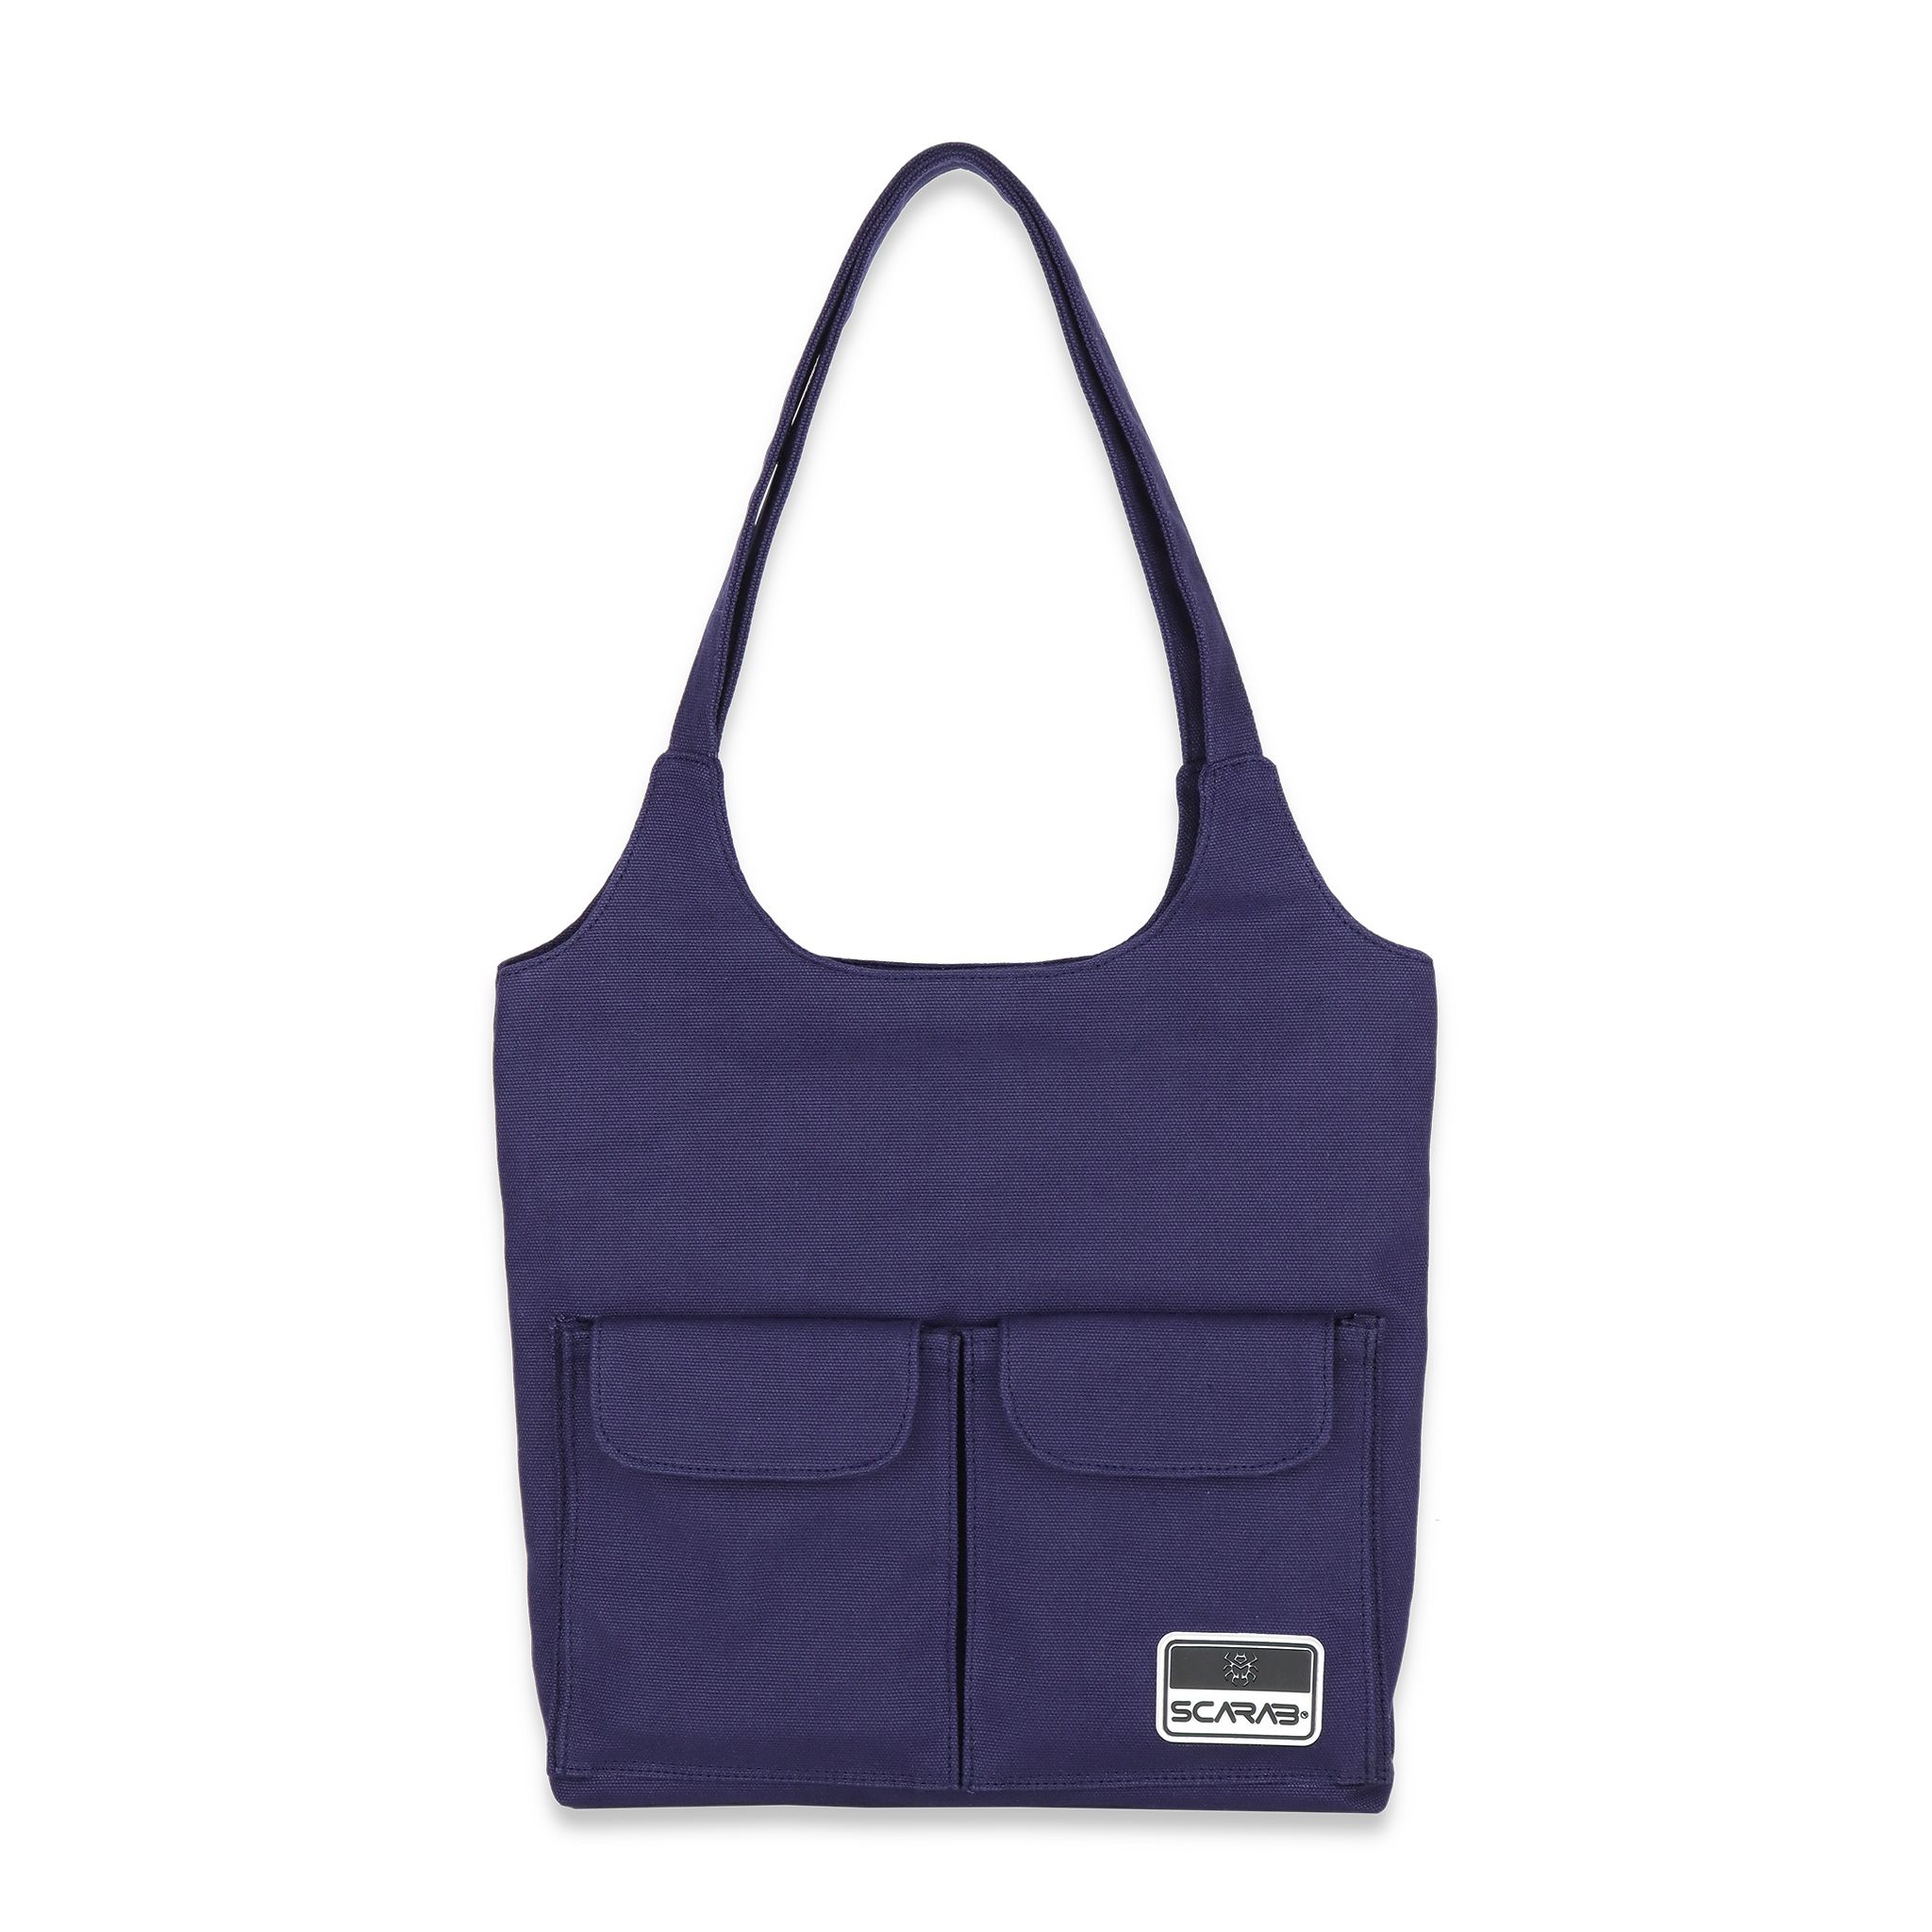  CARRY TOTE BAG 